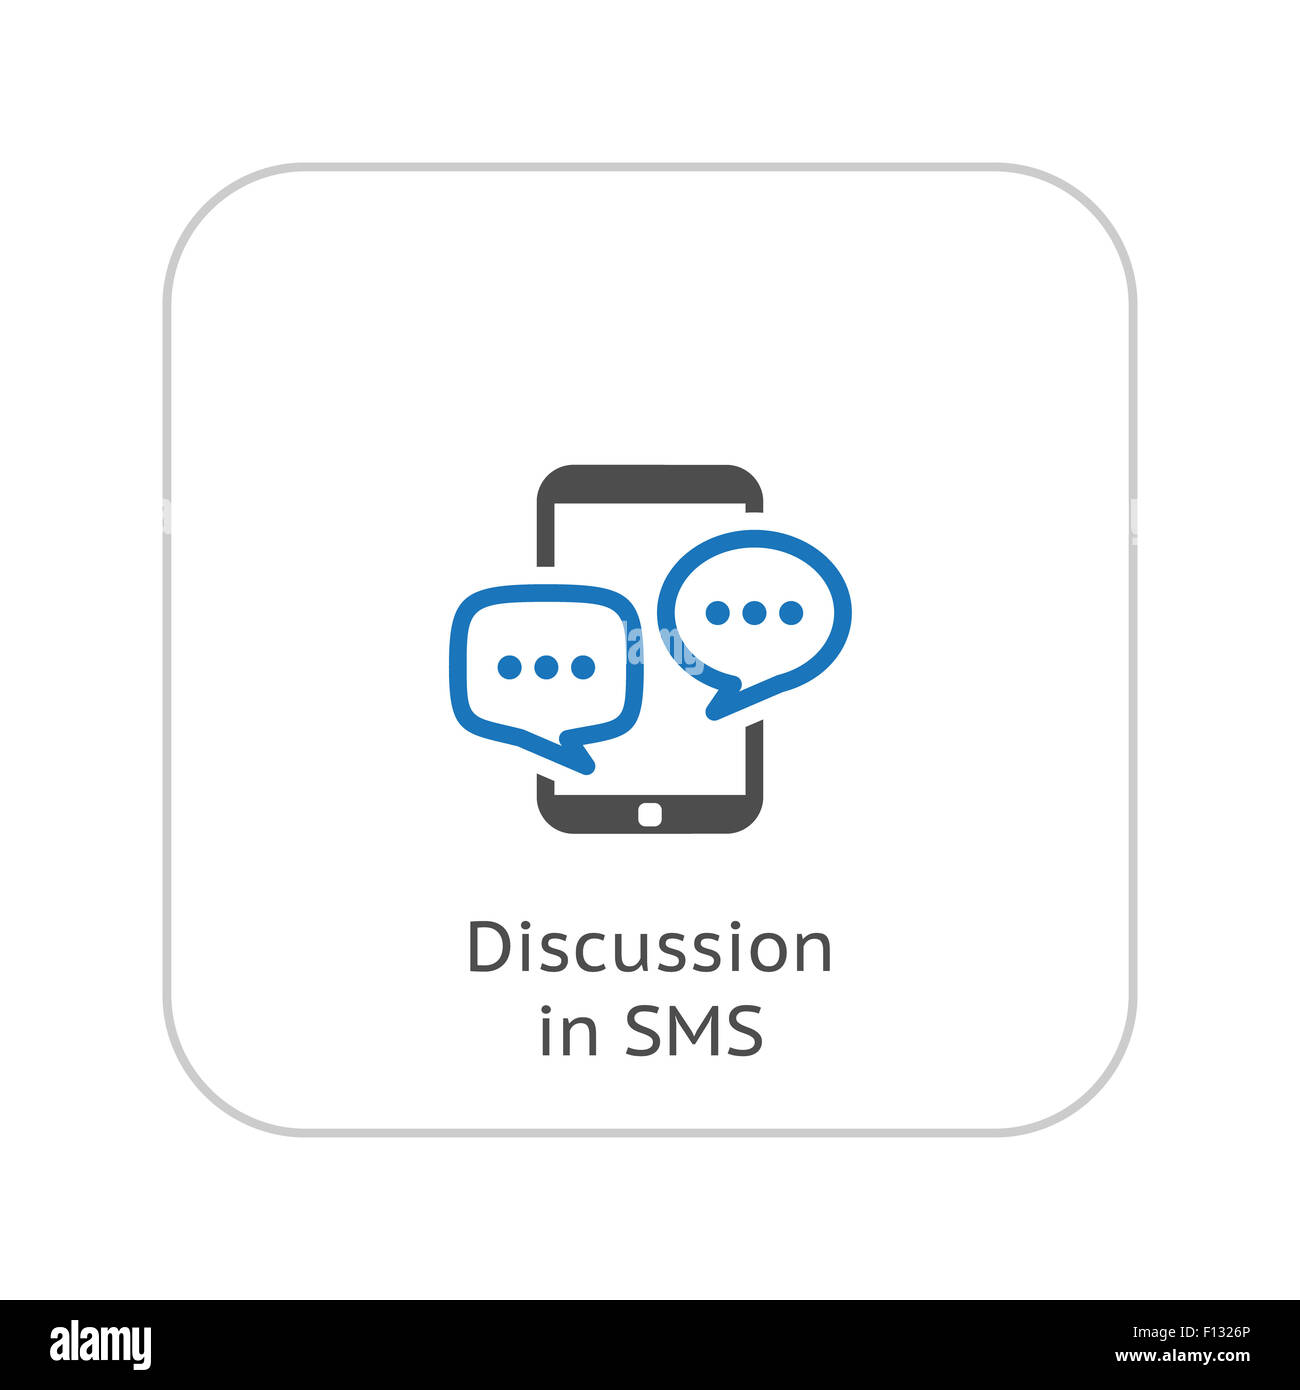 Discussion Icon. Business Concept. Flat Design. Isolated Illustration. Stock Photo